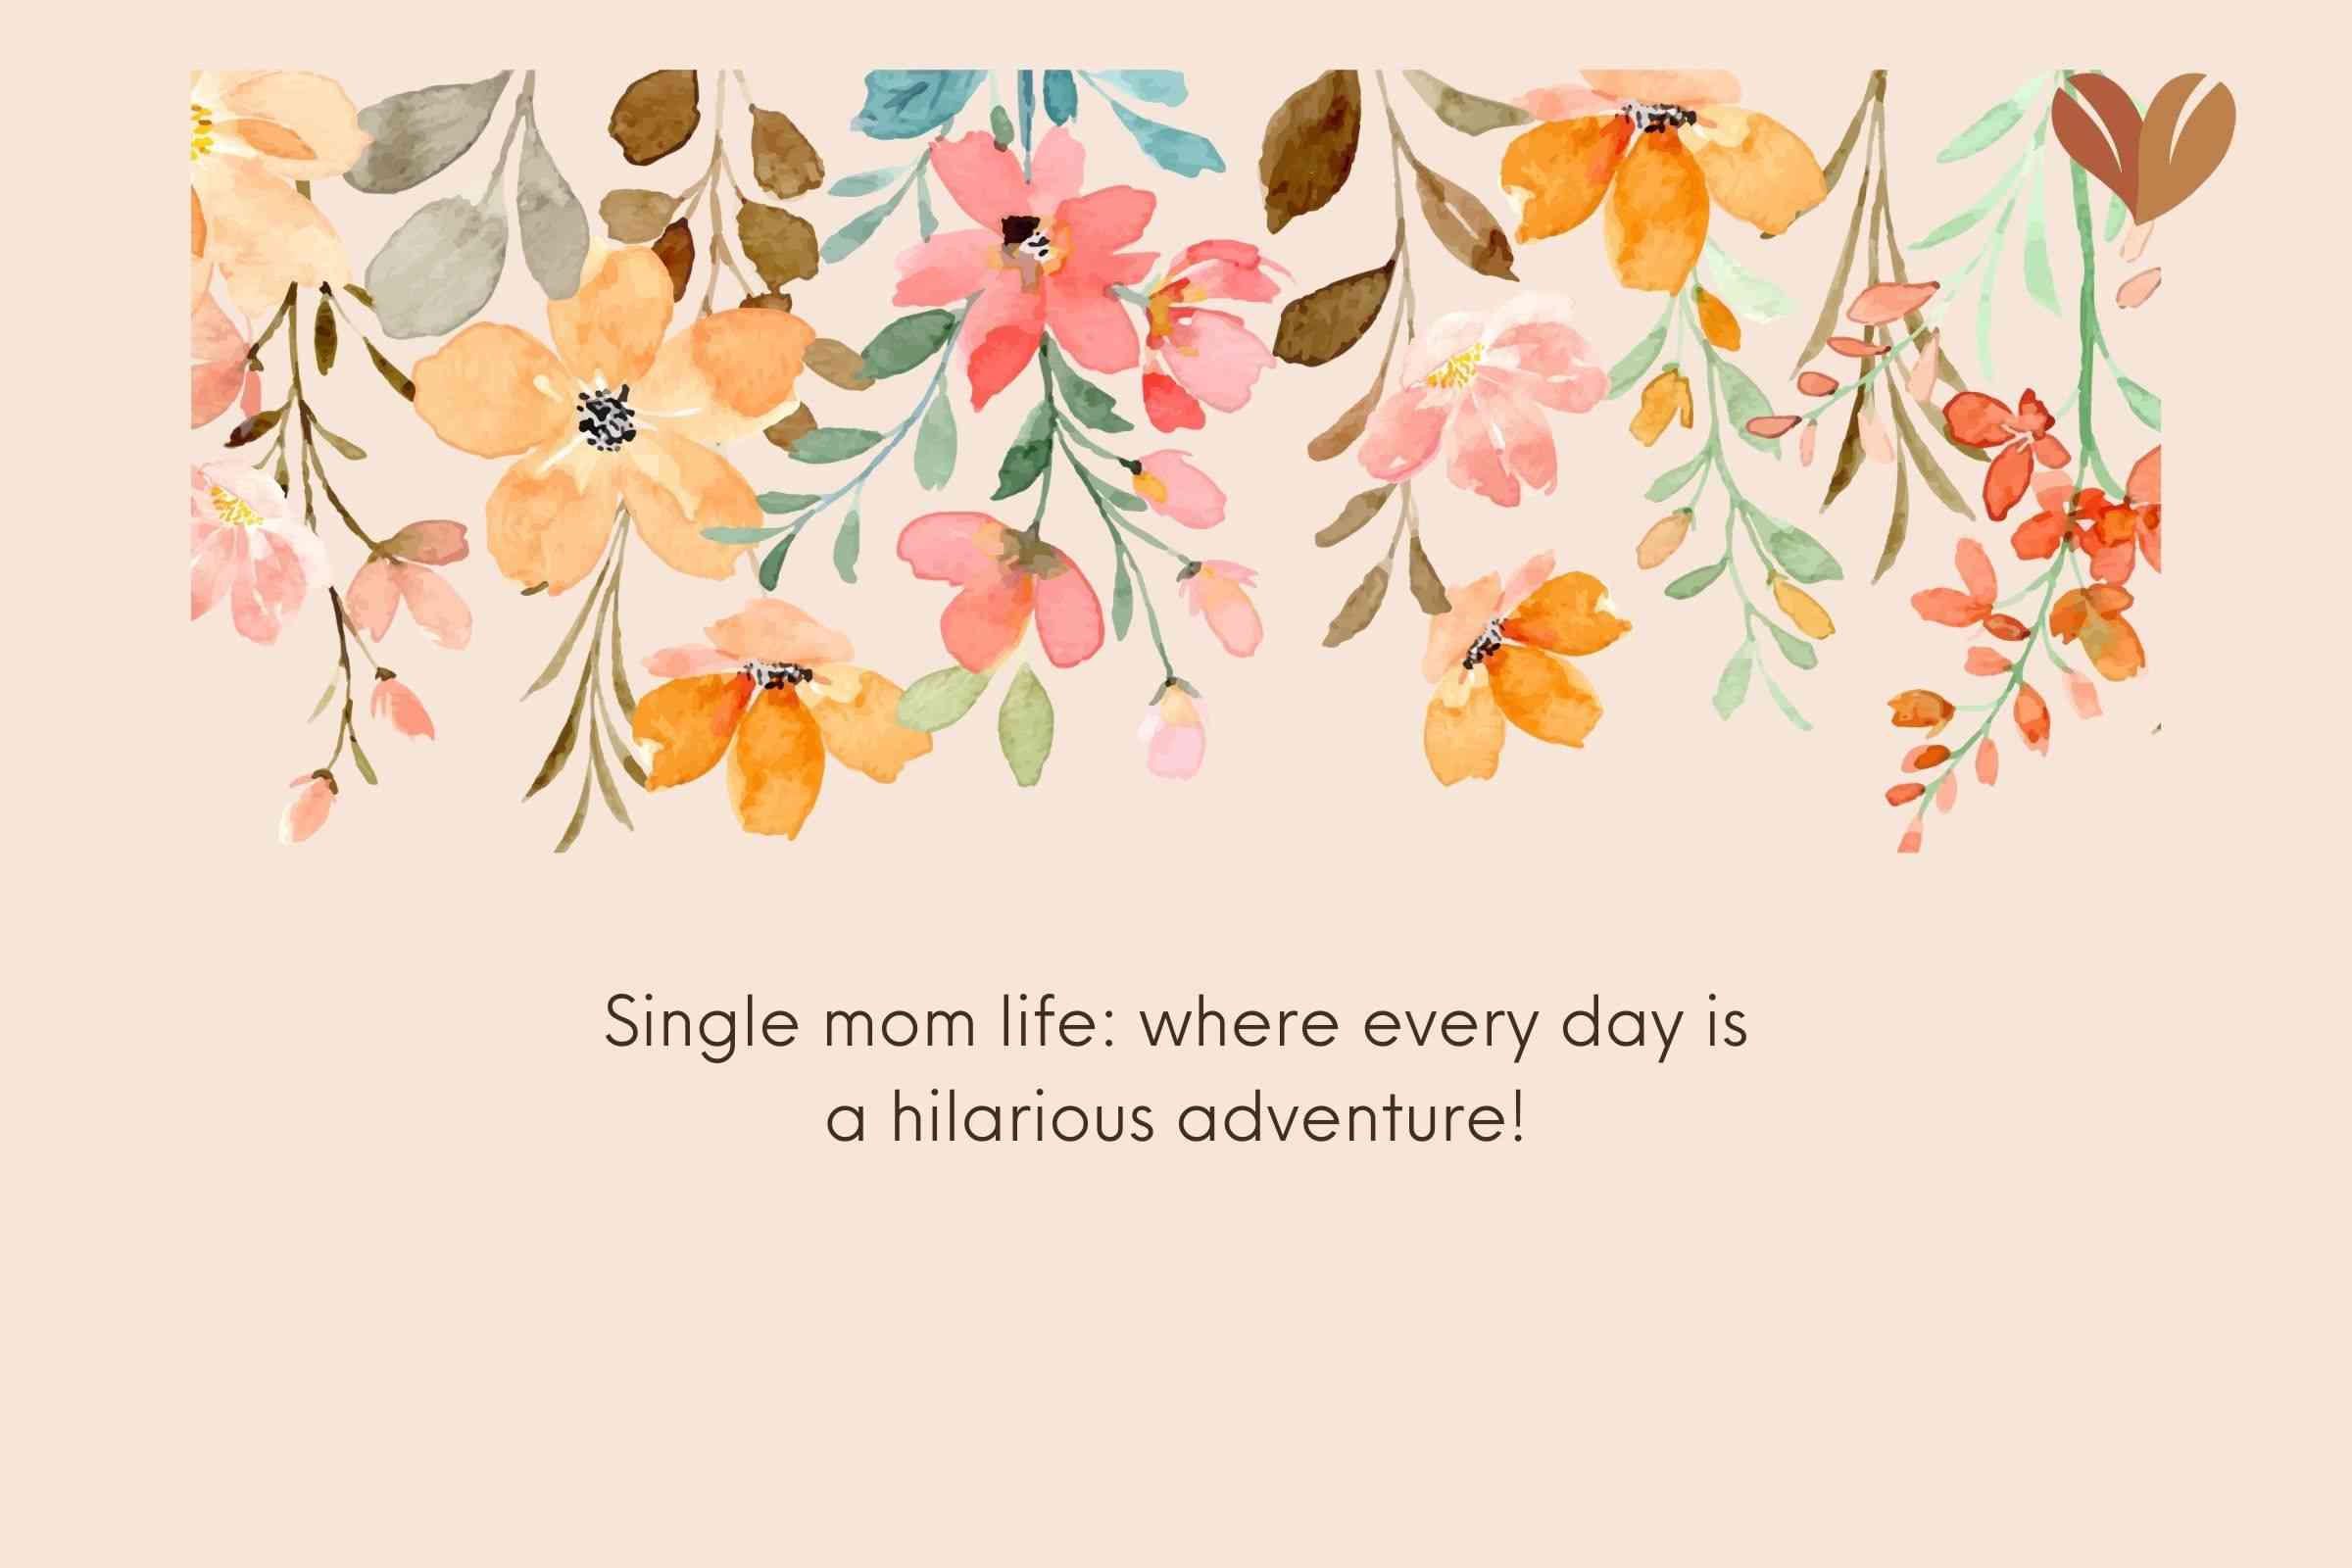 Best Single Mom Quotes Funny - Single mom life: where every day is a hilarious adventure!